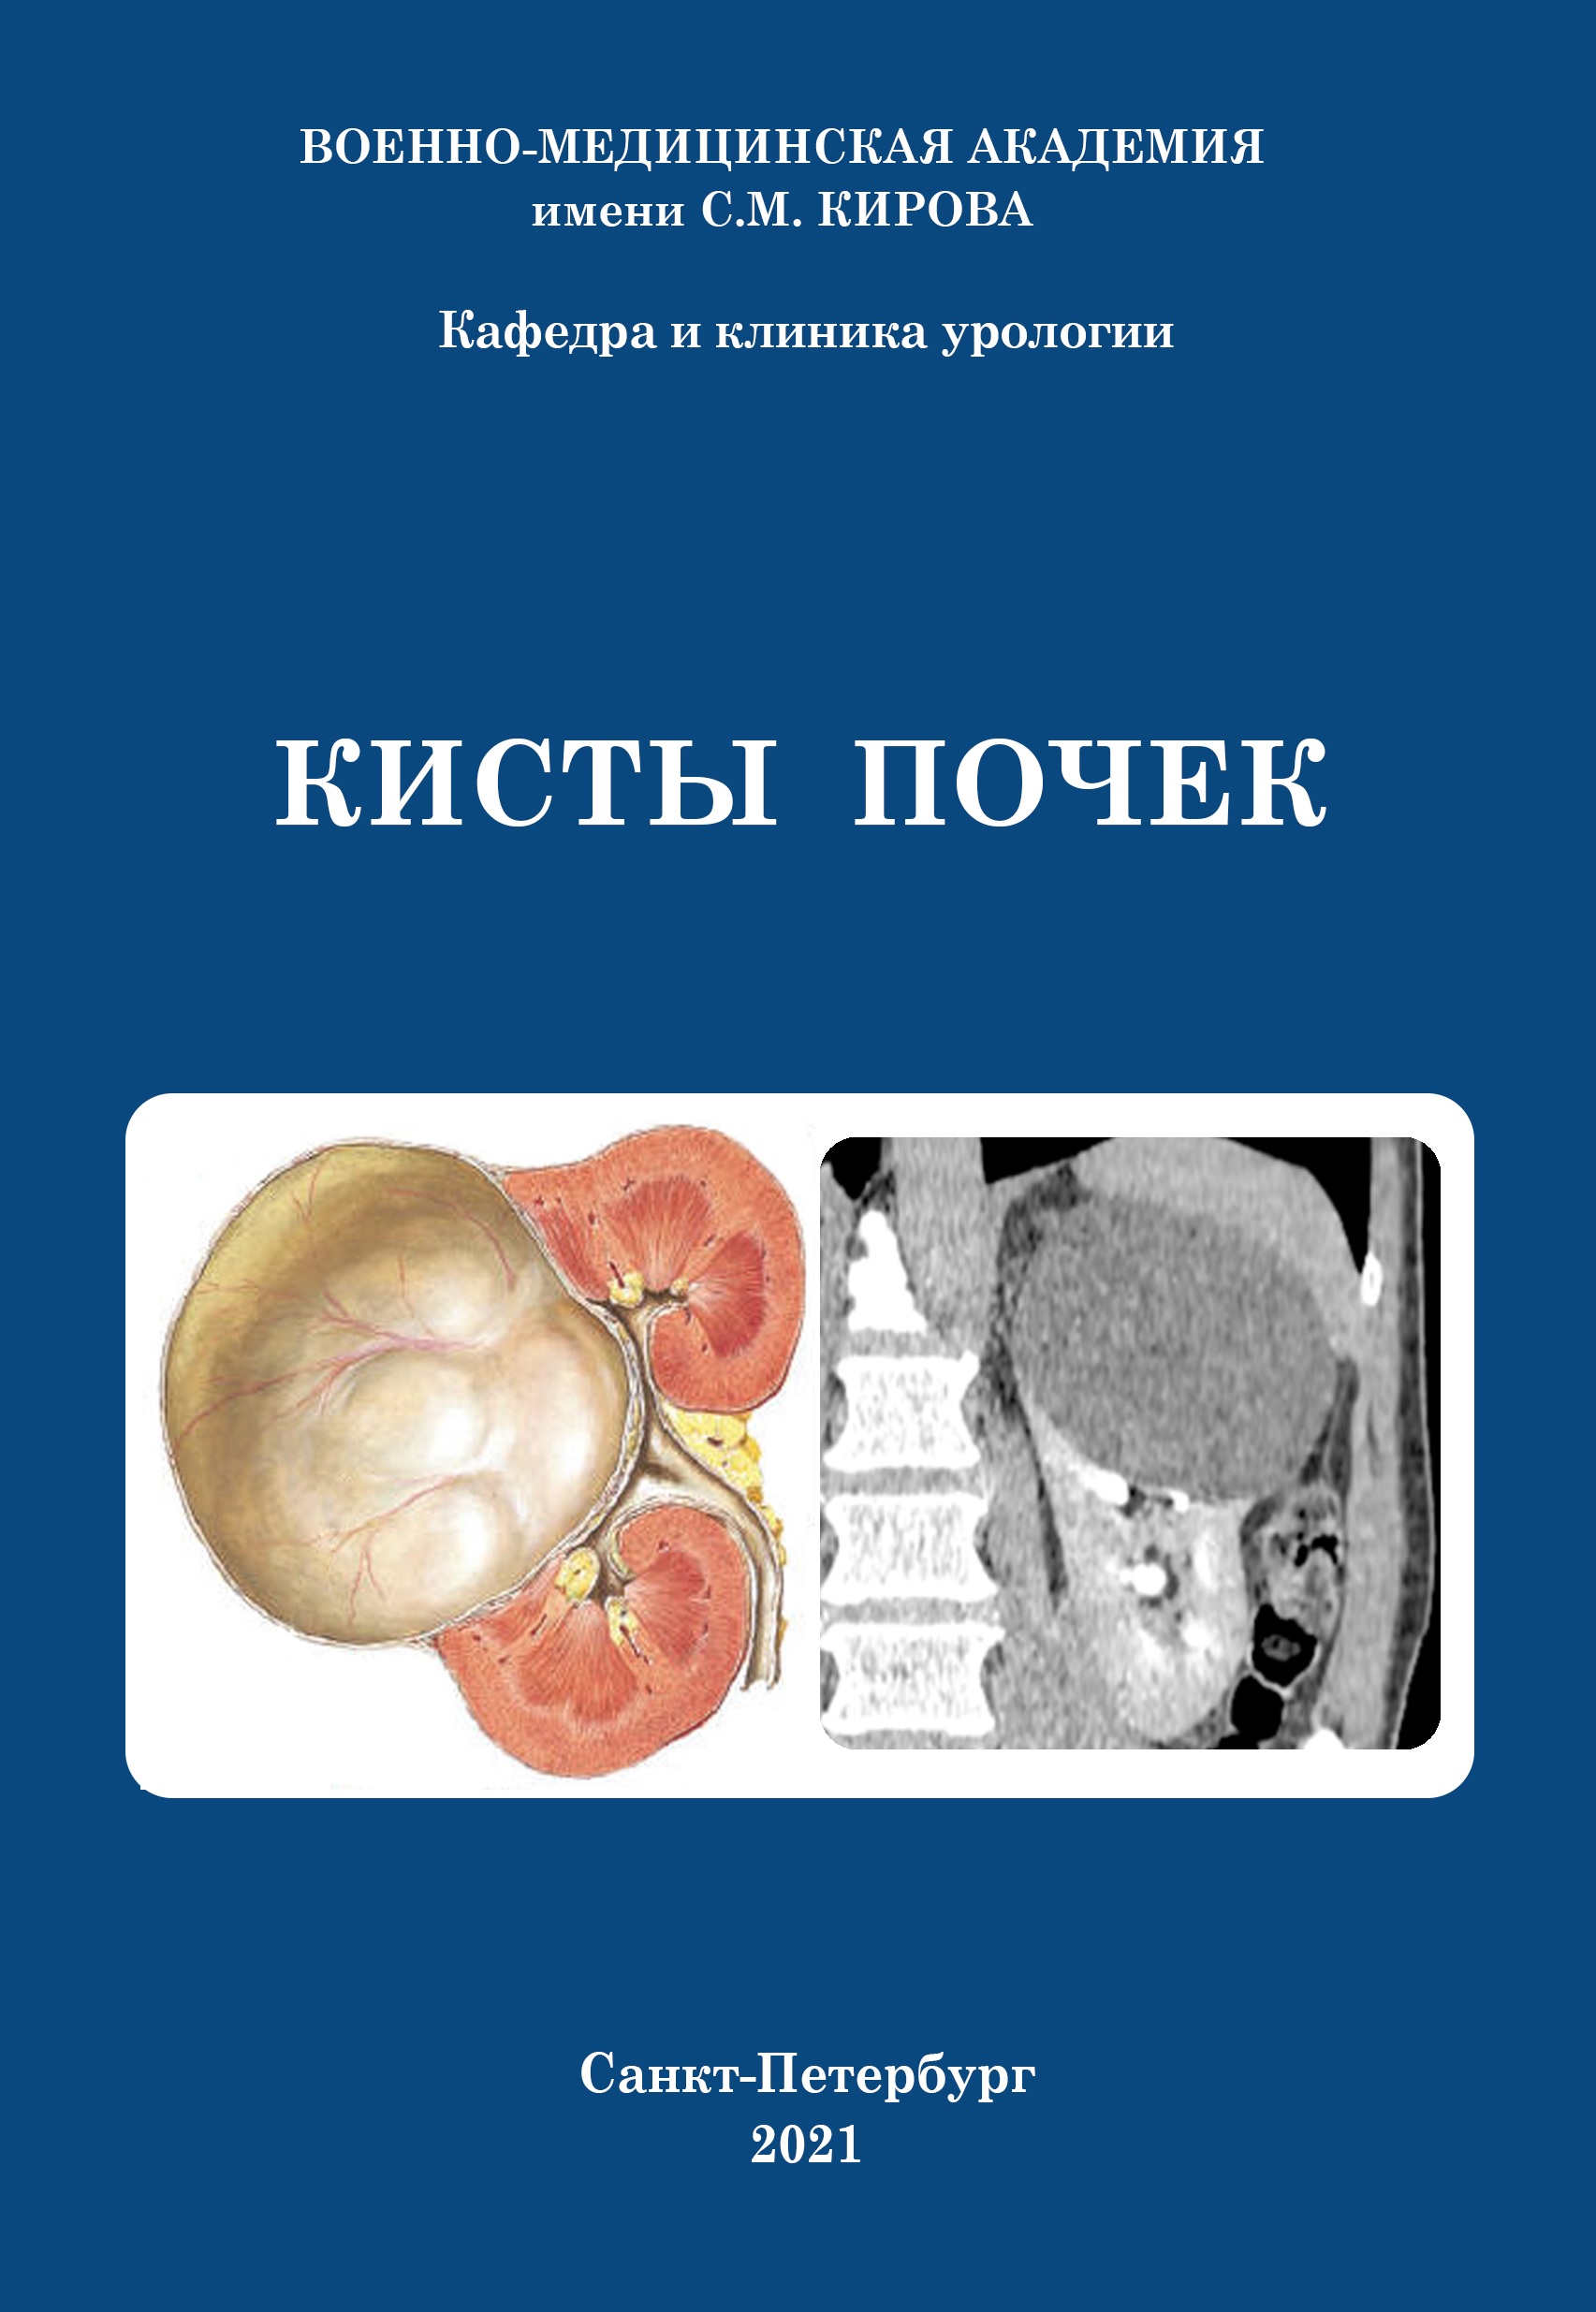                         Kidney cysts
            